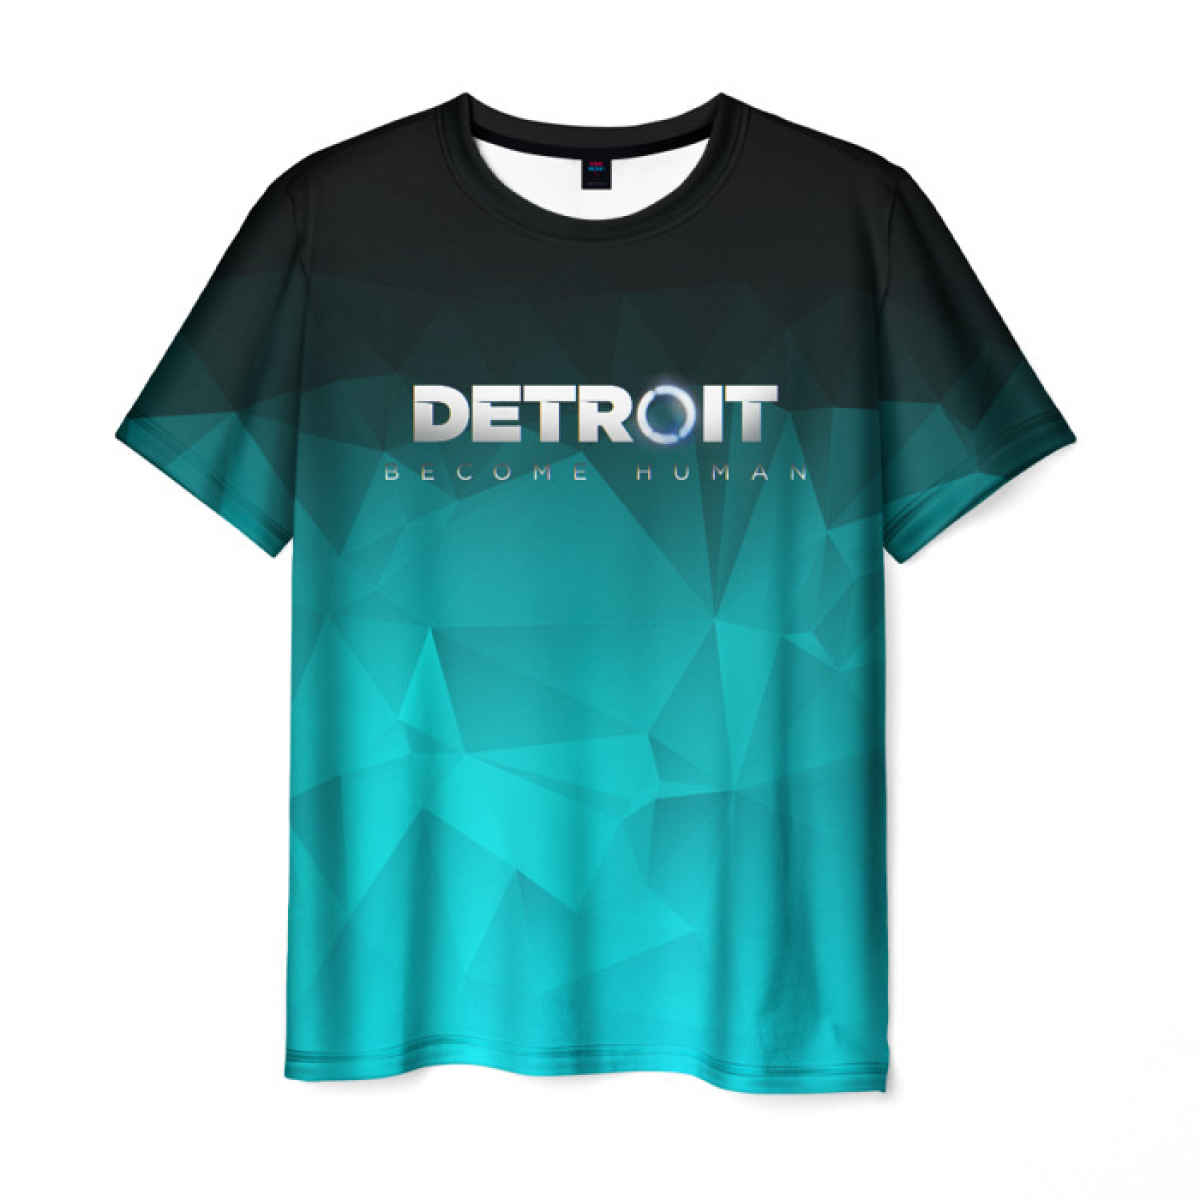 Connor T Shirt inspired by Detroit convertirse en seres humanos PS4-T Shirt